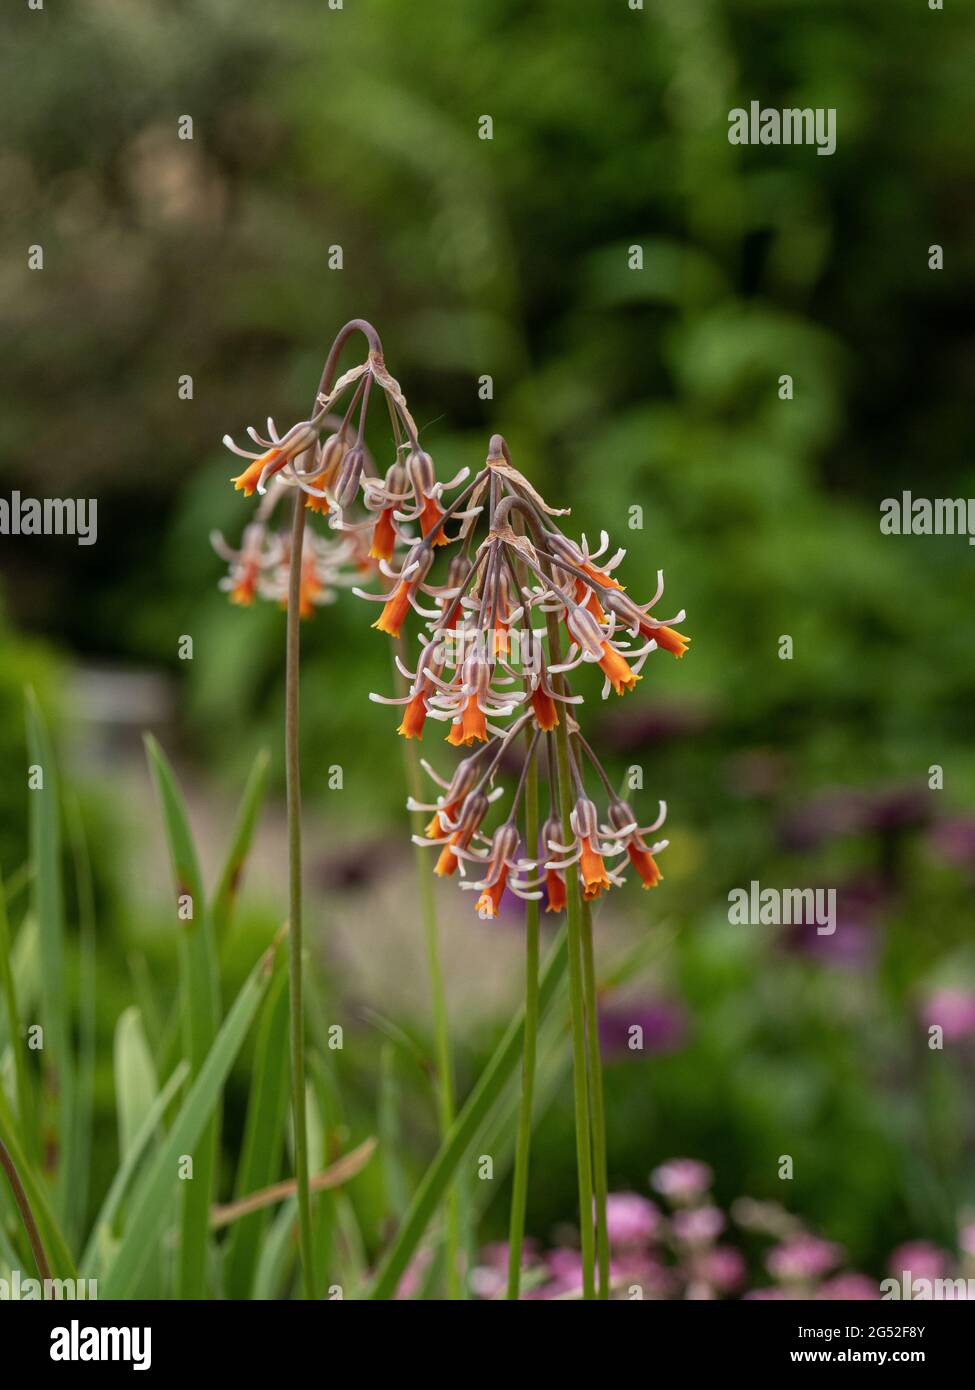 A close up of a group of the orange and white flowers of Tulbaghia capensis Stock Photo